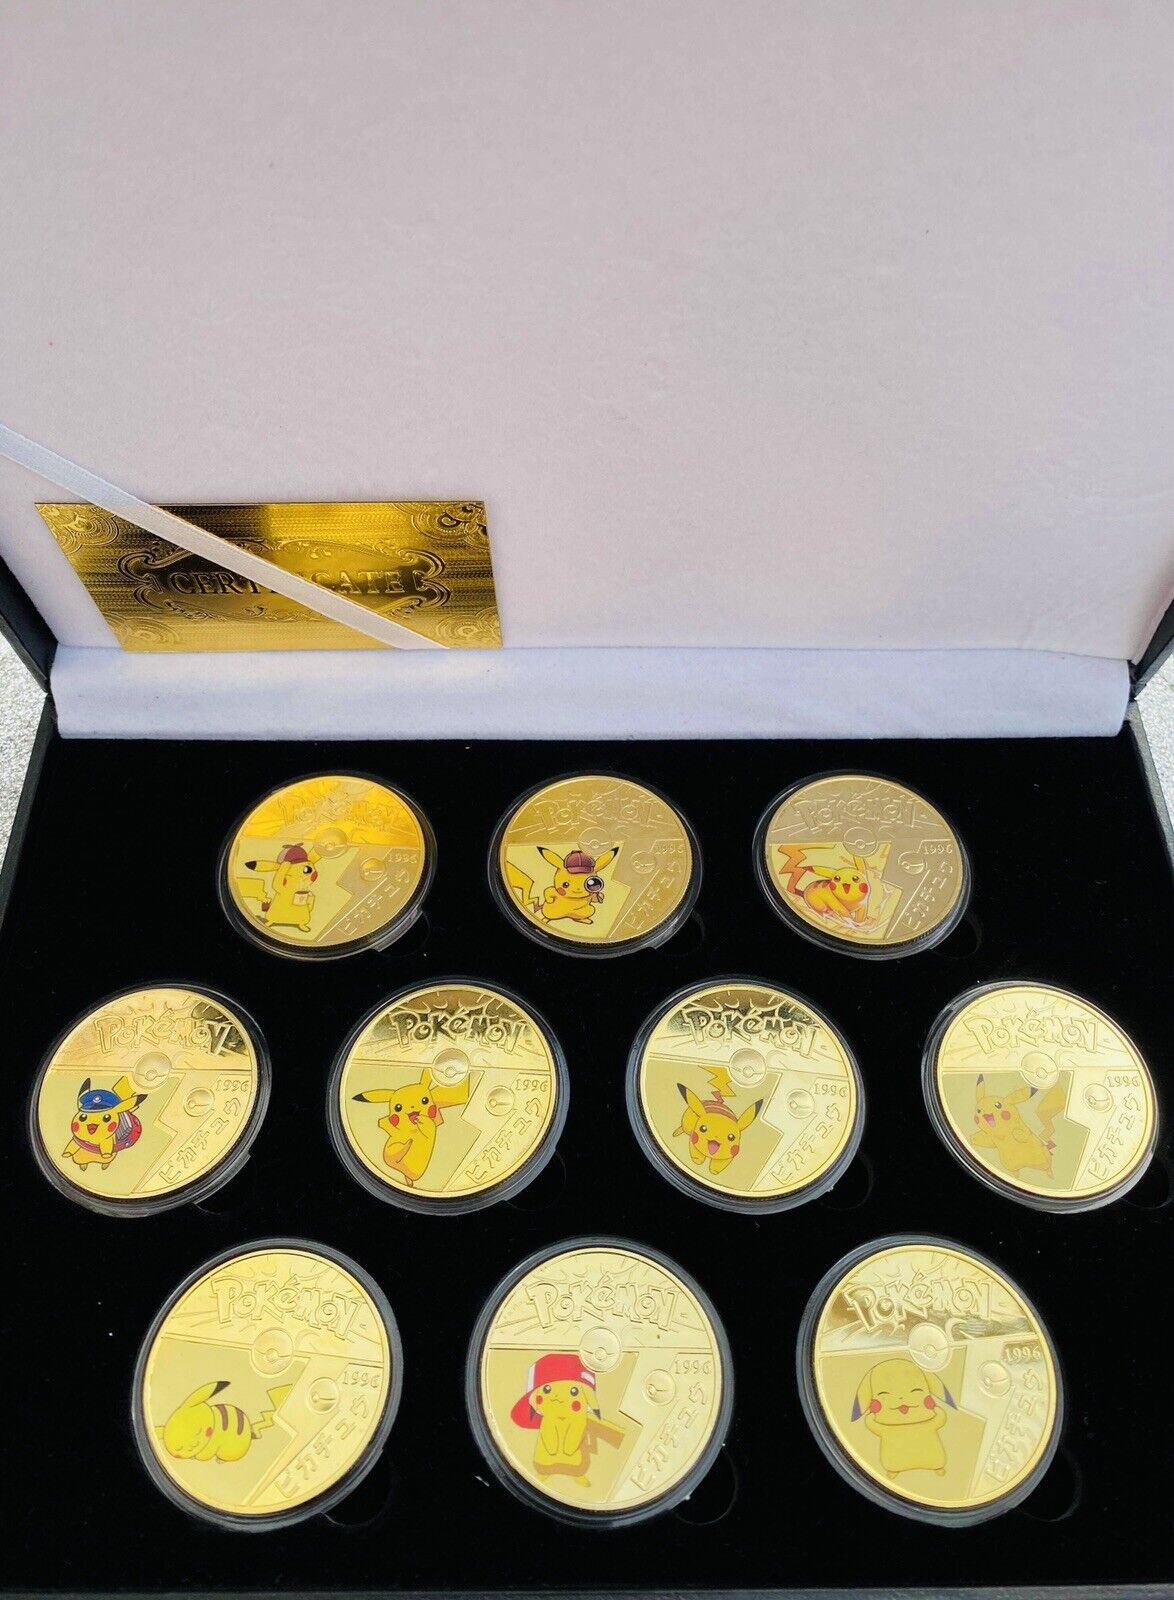 Pokemon X10 Pikachu Gold Plated Collectable Coins Card Gift Set Souvenir New Set